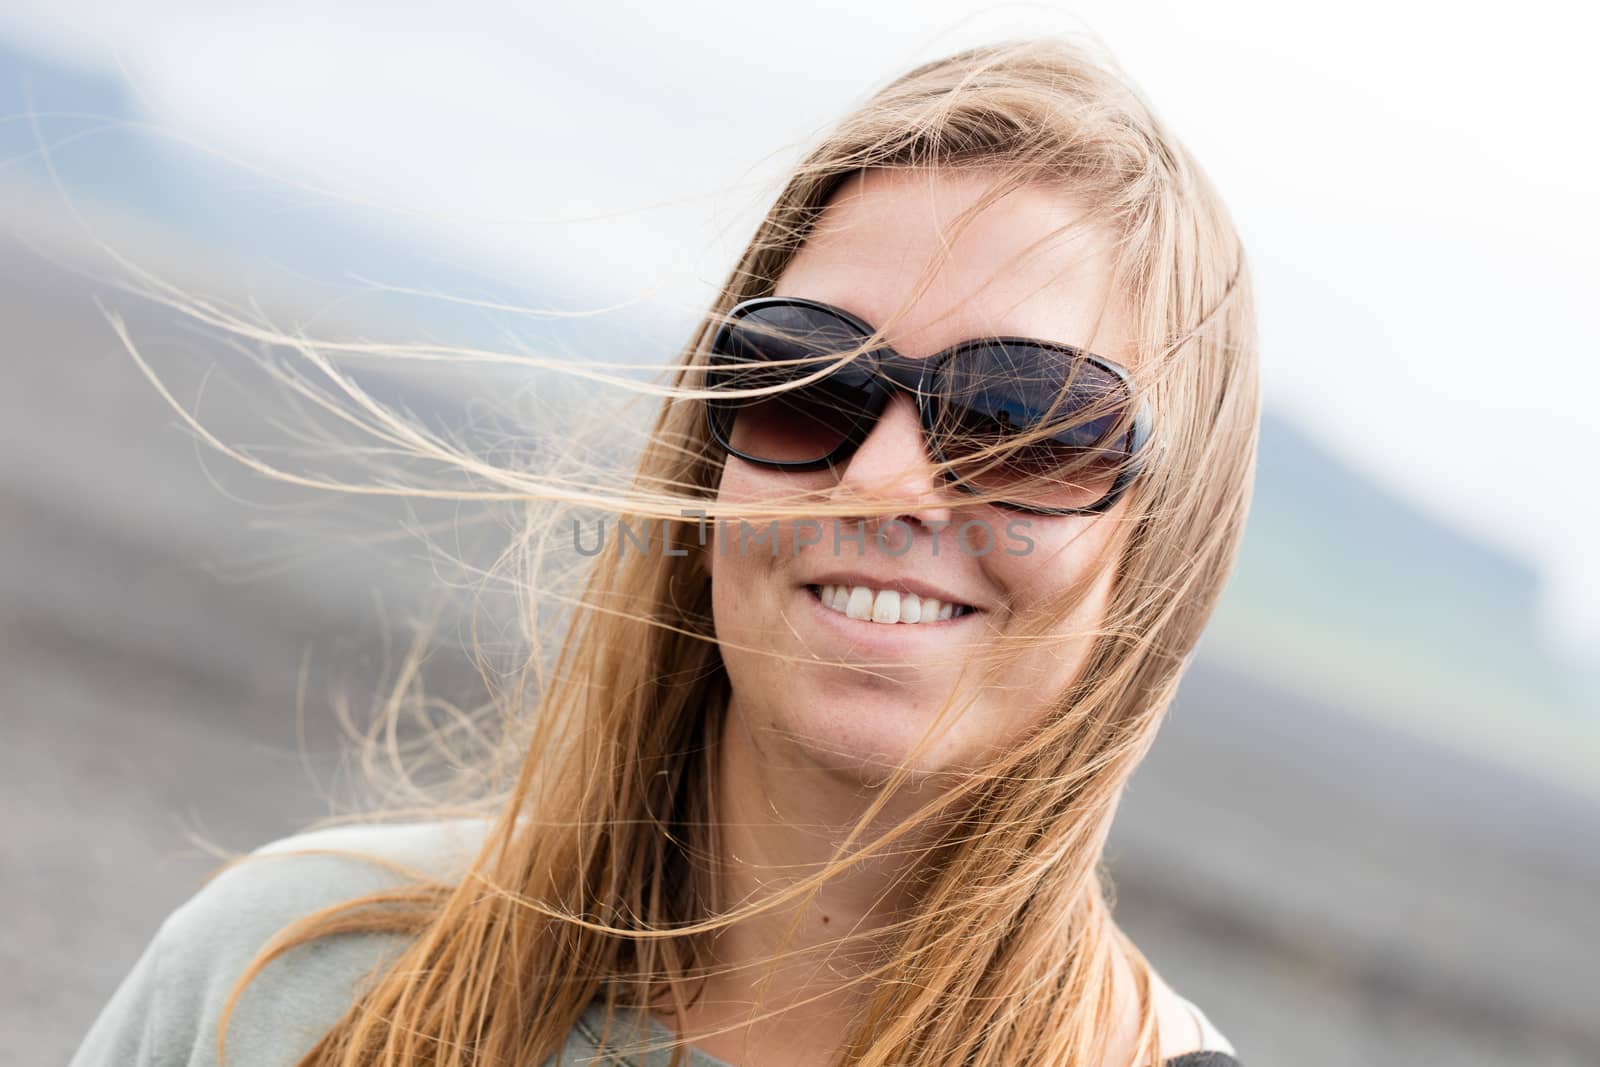 Young woman wearing sunglasses laughing by michaklootwijk